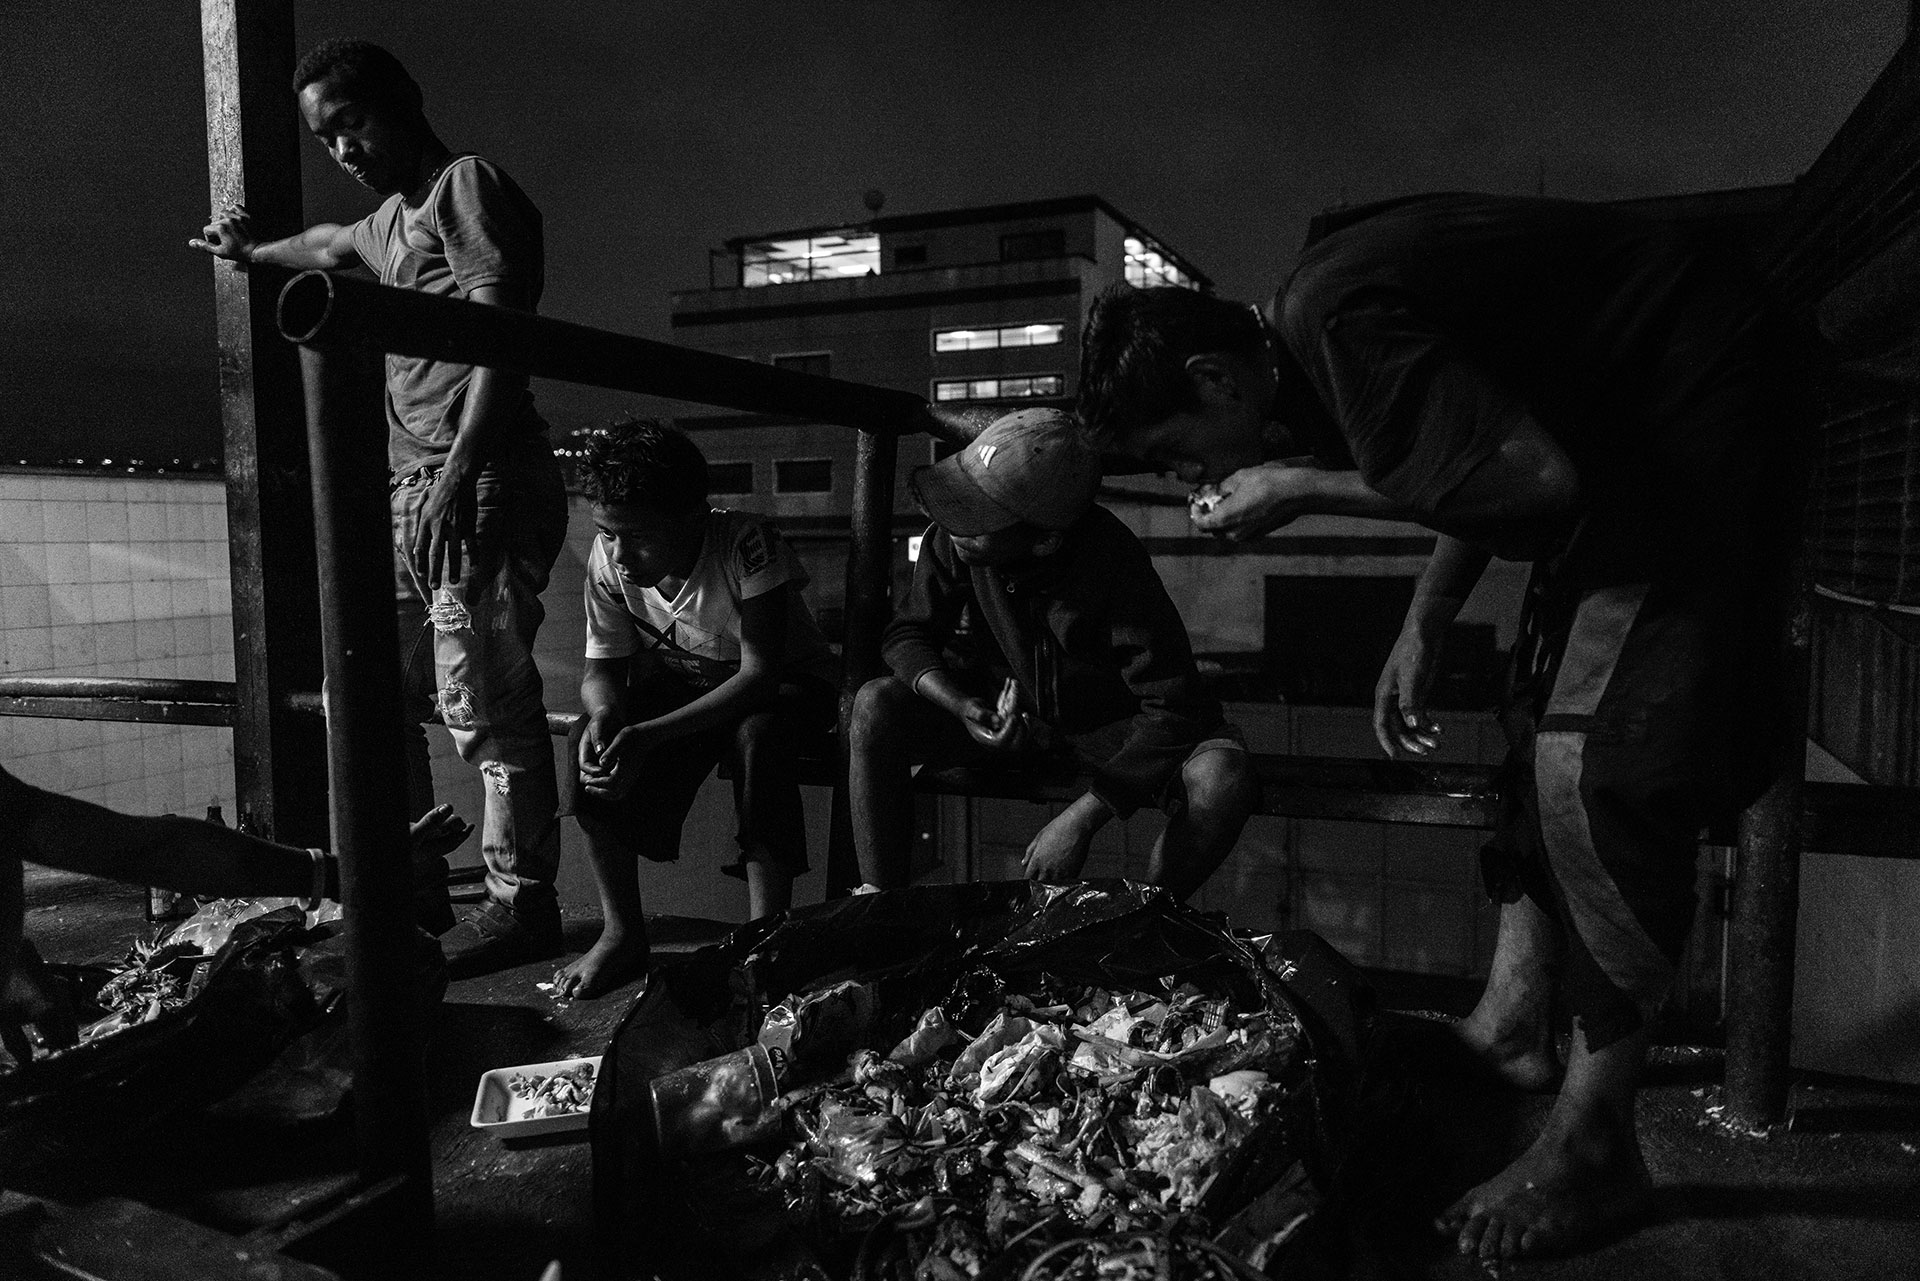 A group of children looks for food in the waste generated by a large shopping centre. According to Caritas, 53% of families have been forced to look for food from non-conventional sources, often understood as a euphemism for the rubbish bins.